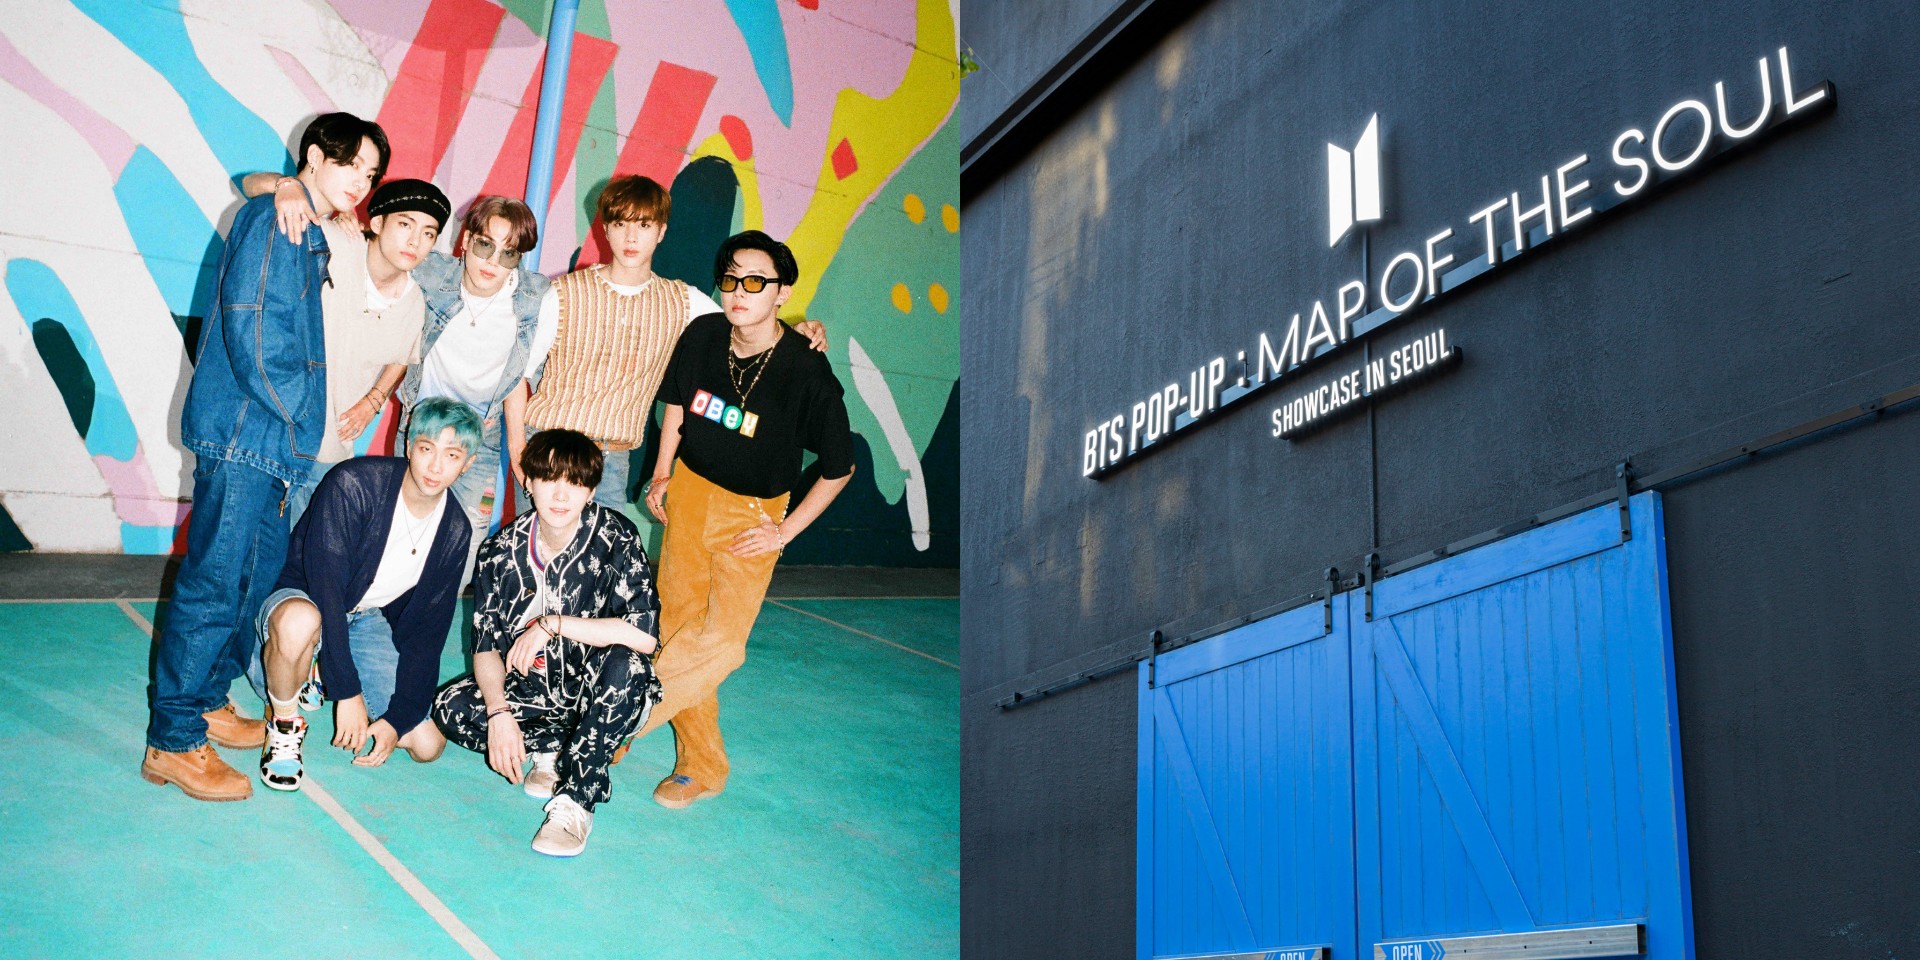 BTS open Map of the Soul online pop-up store, with showcases in Seoul, Singapore, and Tokyo, here's what you need to know